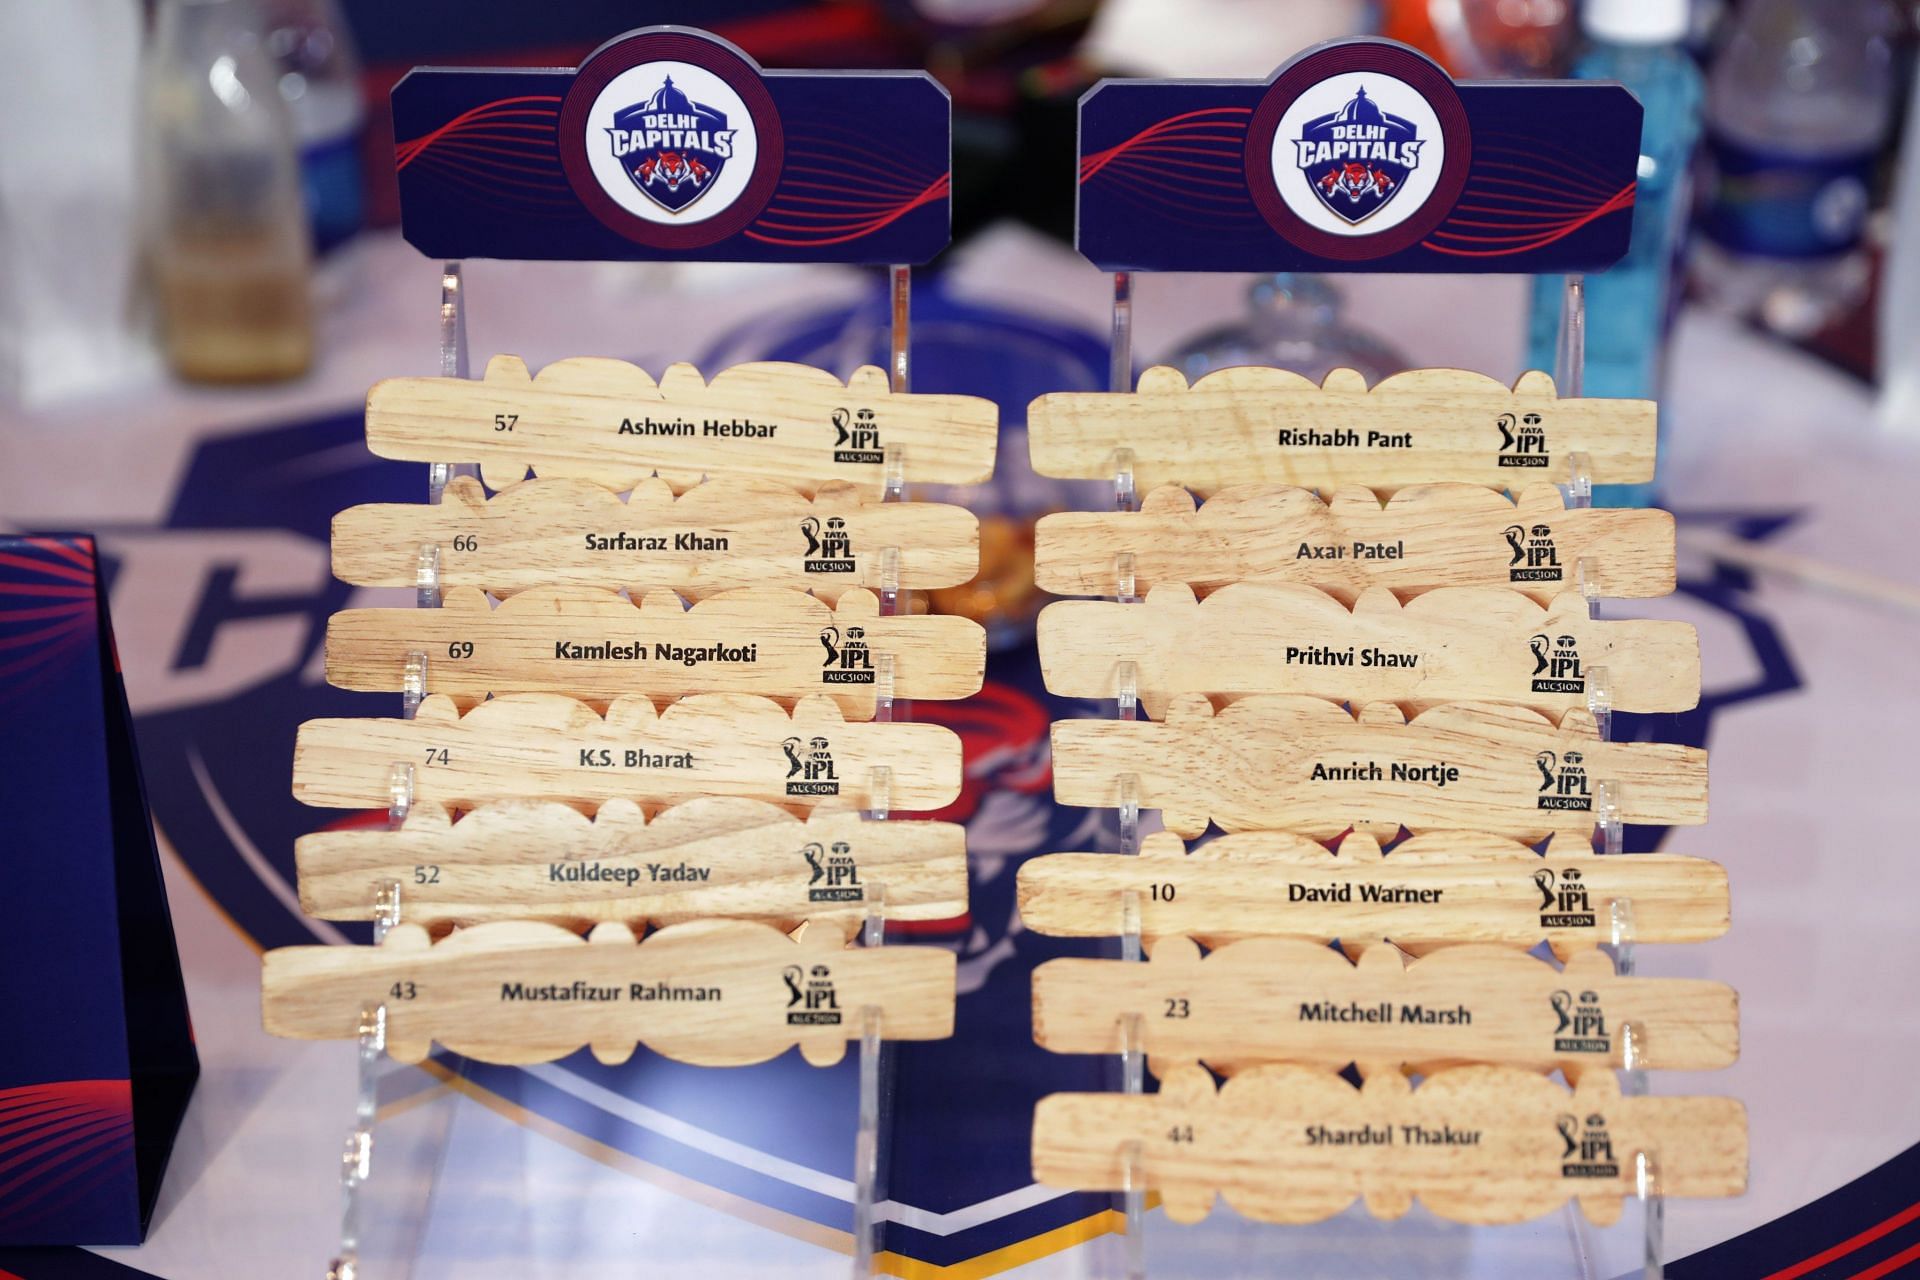 Delhi Capitals signed nine players on the opening day of the IPL 2022 Auction (Image Courtesy: Delhi Capitals/Twitter)